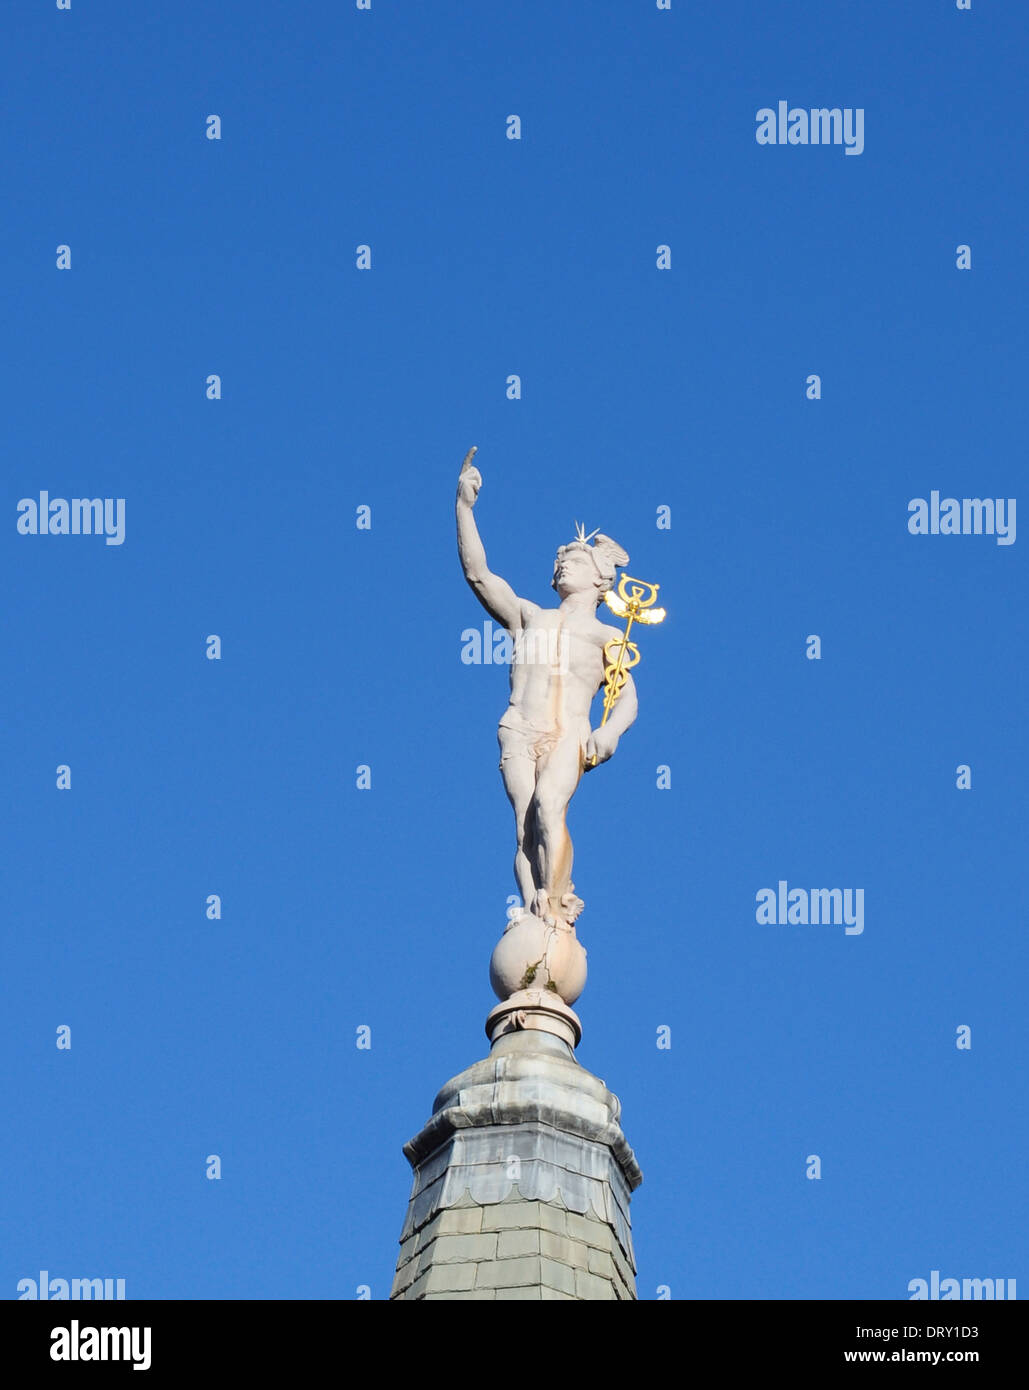 Statue of Roman god Mercury, by Arthur Stanley Young, on roof of Willing House, Gray's Inn Road, London, England, UK Stock Photo